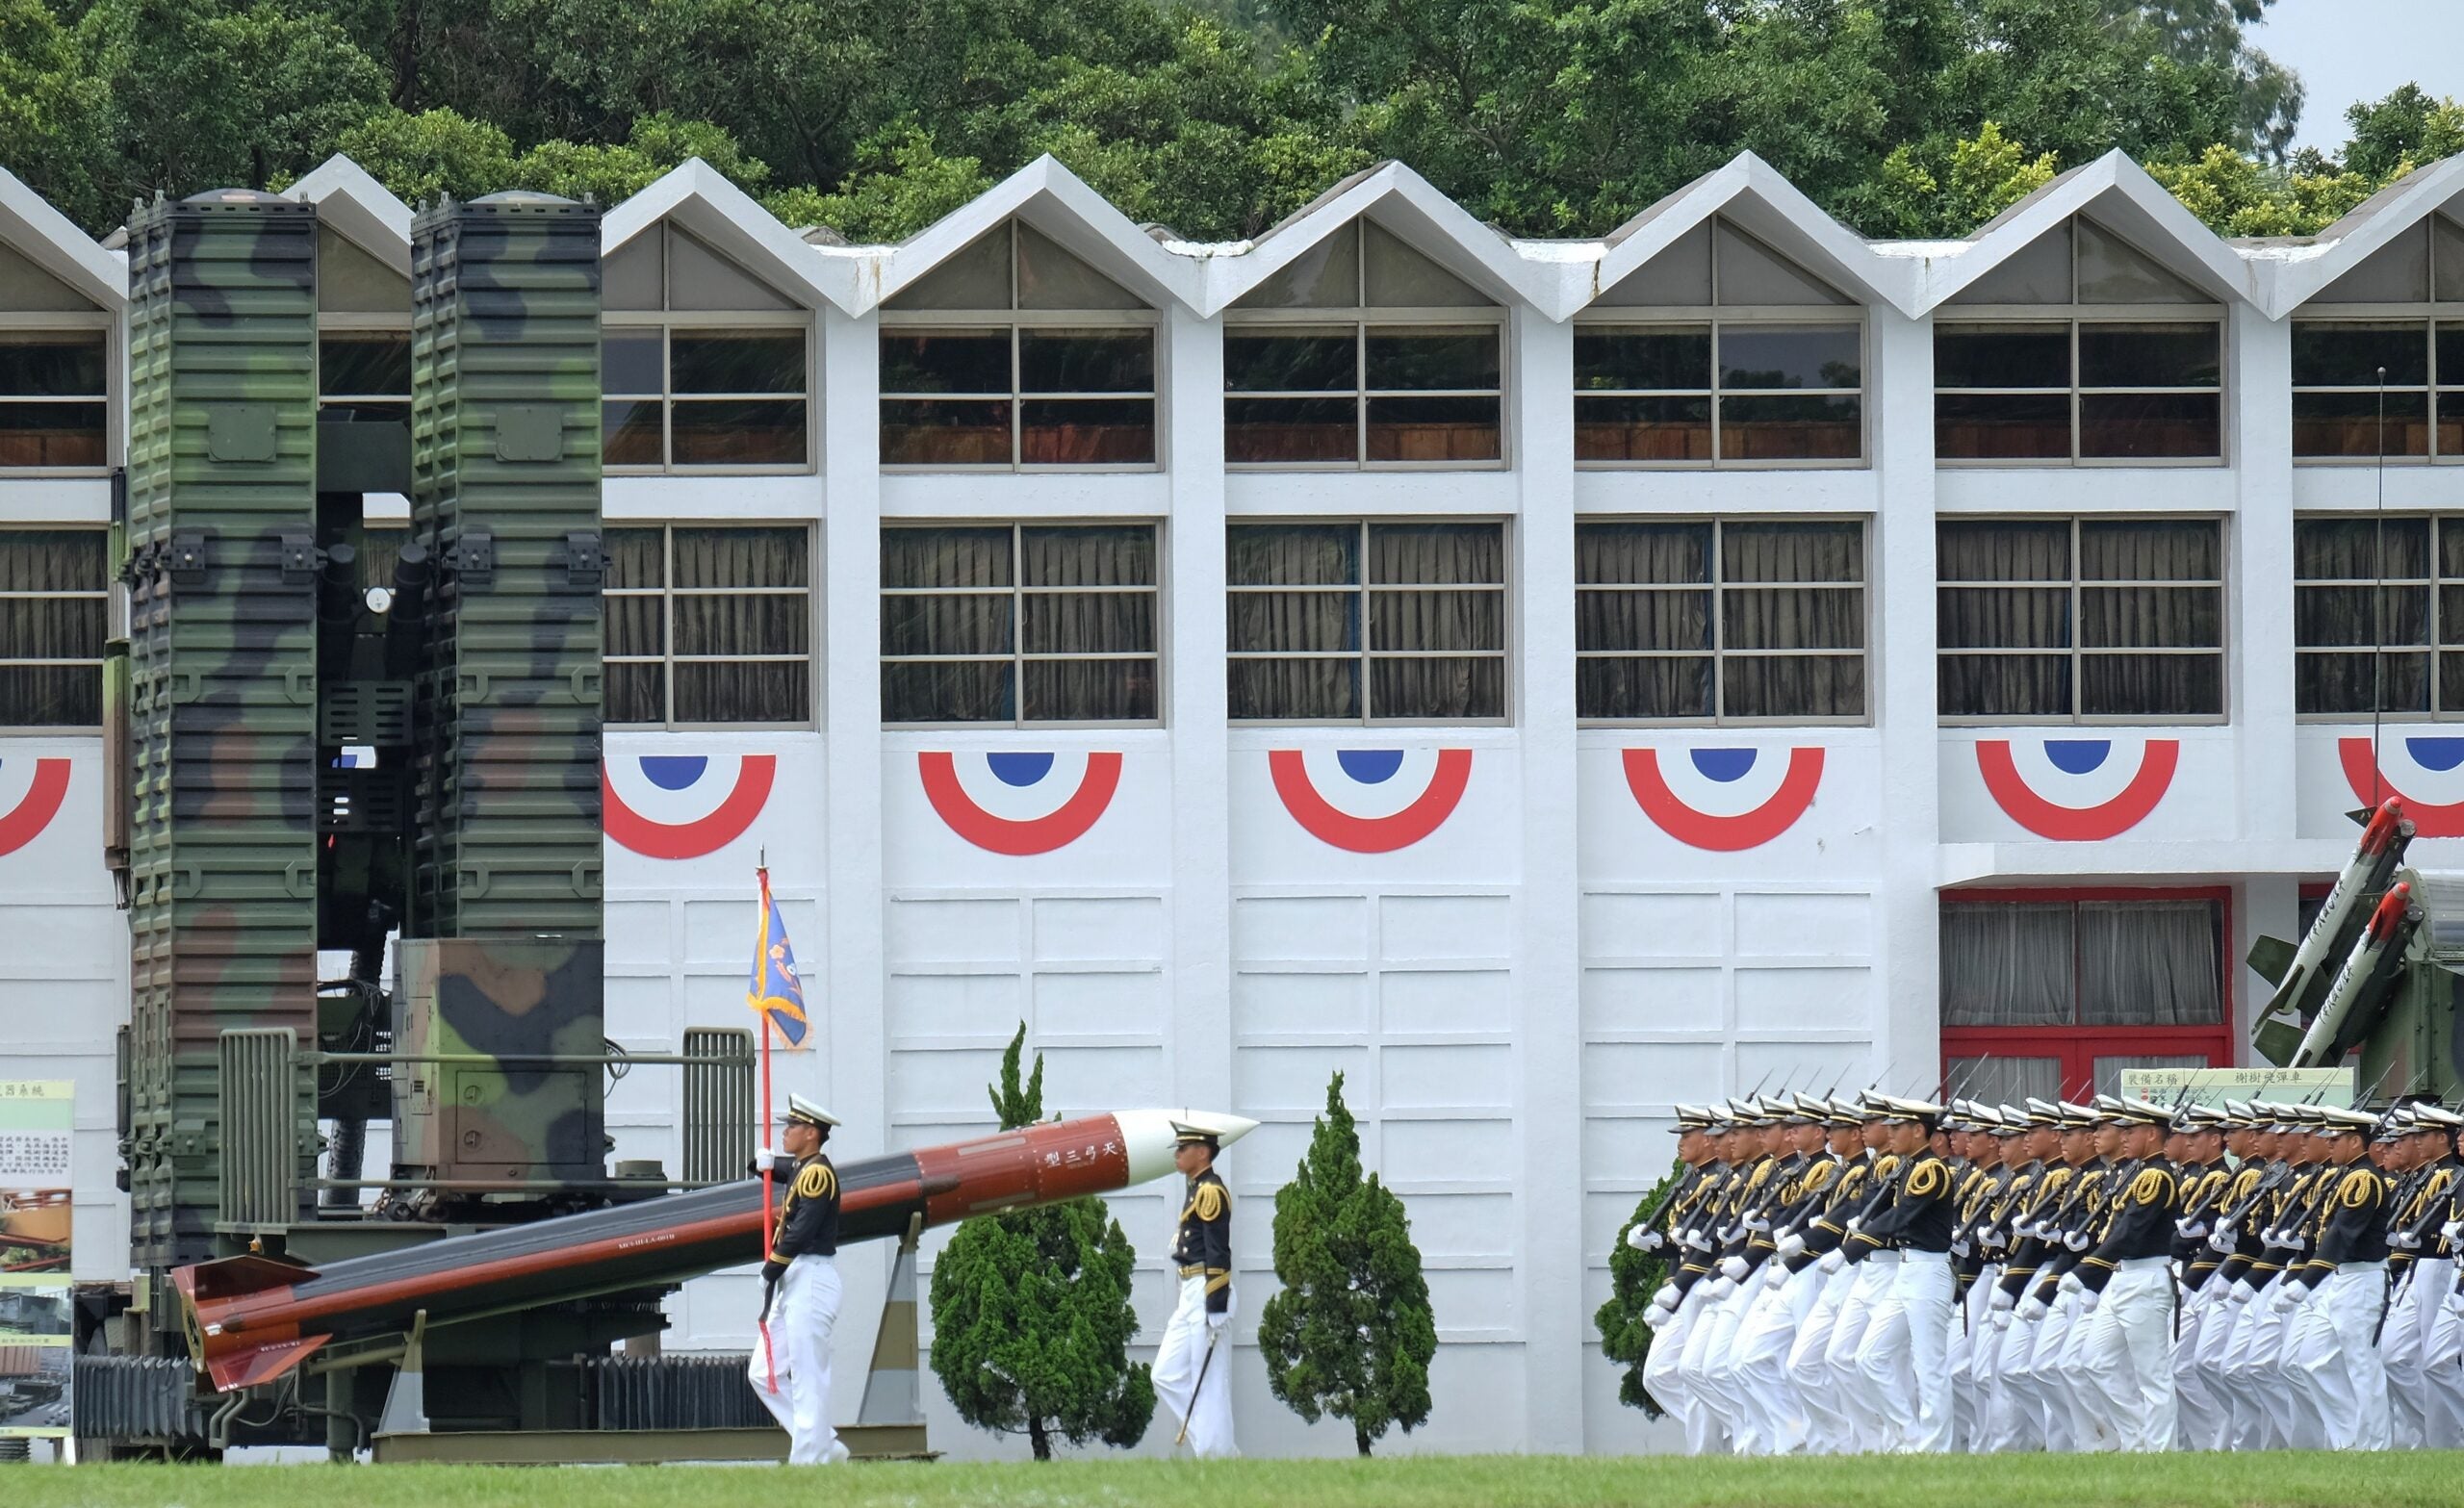 Students from the Taiwan Military Academy, known as former Whampoa military academy, walk past a model of a home made Tien Kung III missile in southern Kaohsiung on June 16, 2014. More then 1,200 military students have graduated from the Taiwan Military Academy as President Ma Ying-jeou presided over a ceremony to mark the 90th anniversary of the Whampoa military academy. AFP PHOTO / SAM YEH        (Photo credit should read SAM YEH/AFP via Getty Images)